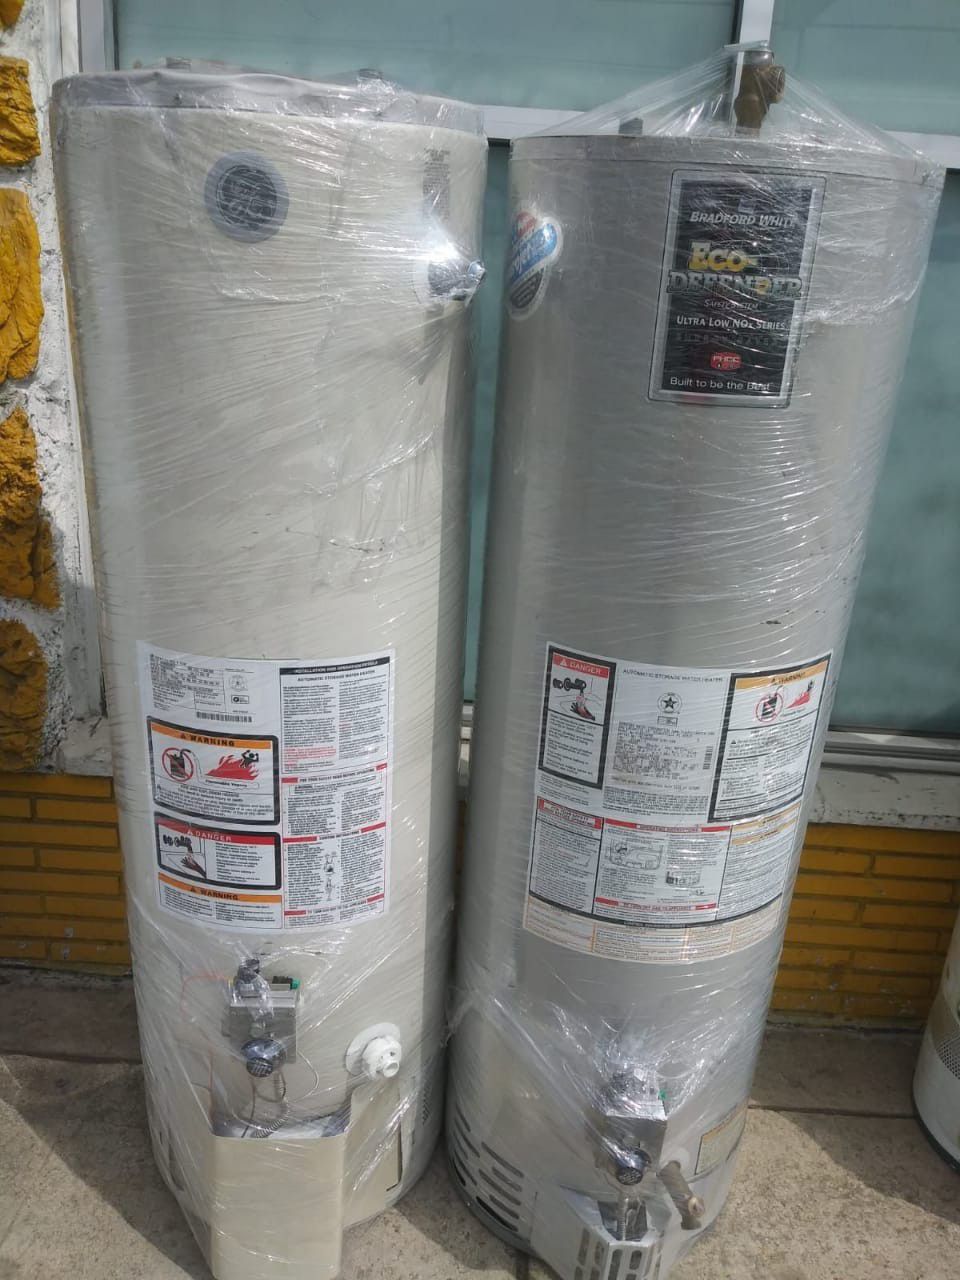 Súper price water heater today for 320 whit installation included